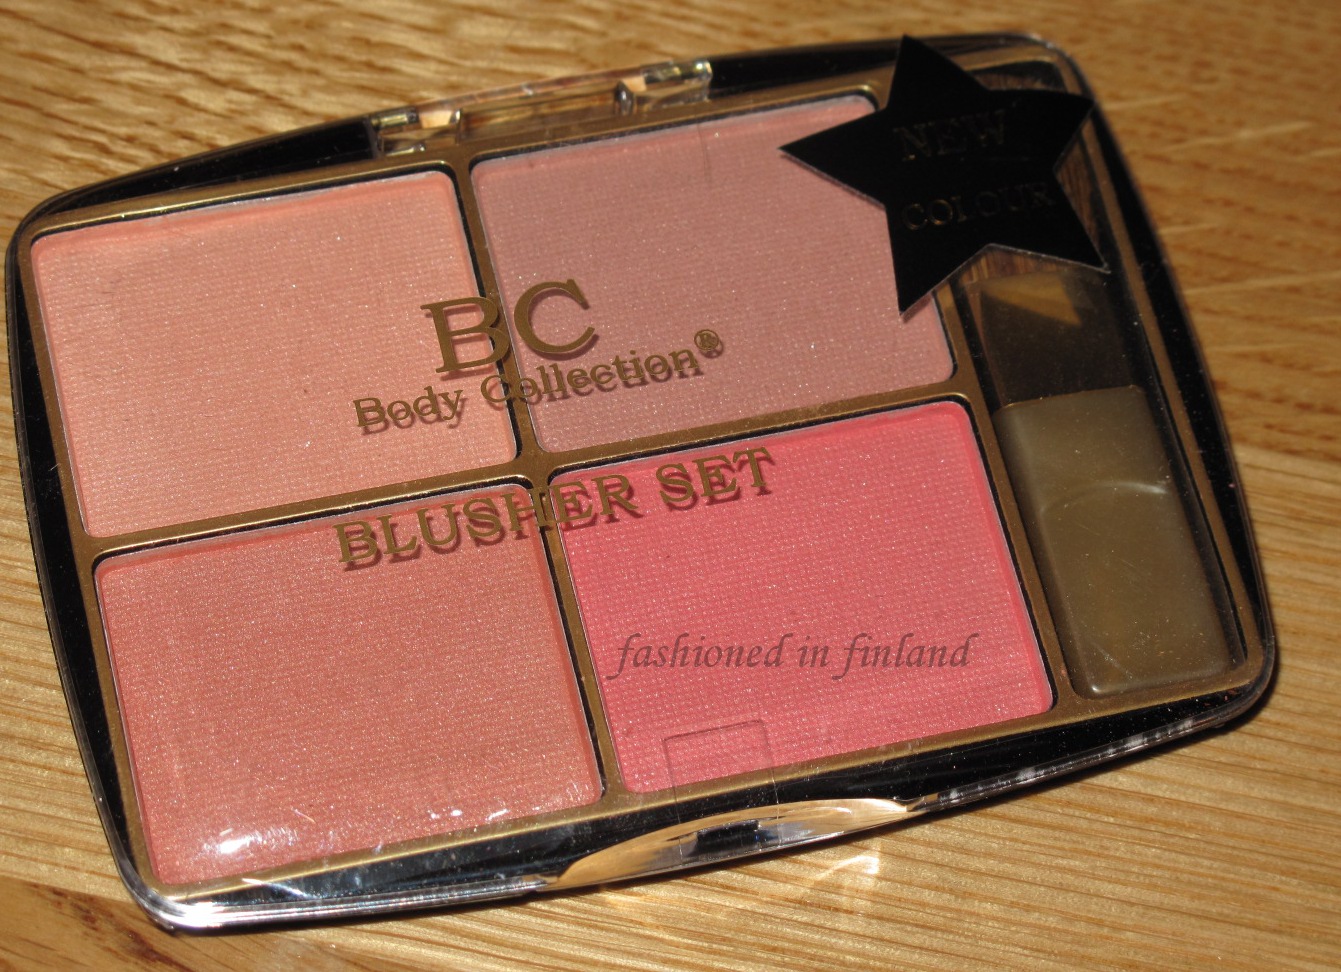 BC Body Collection blusher set